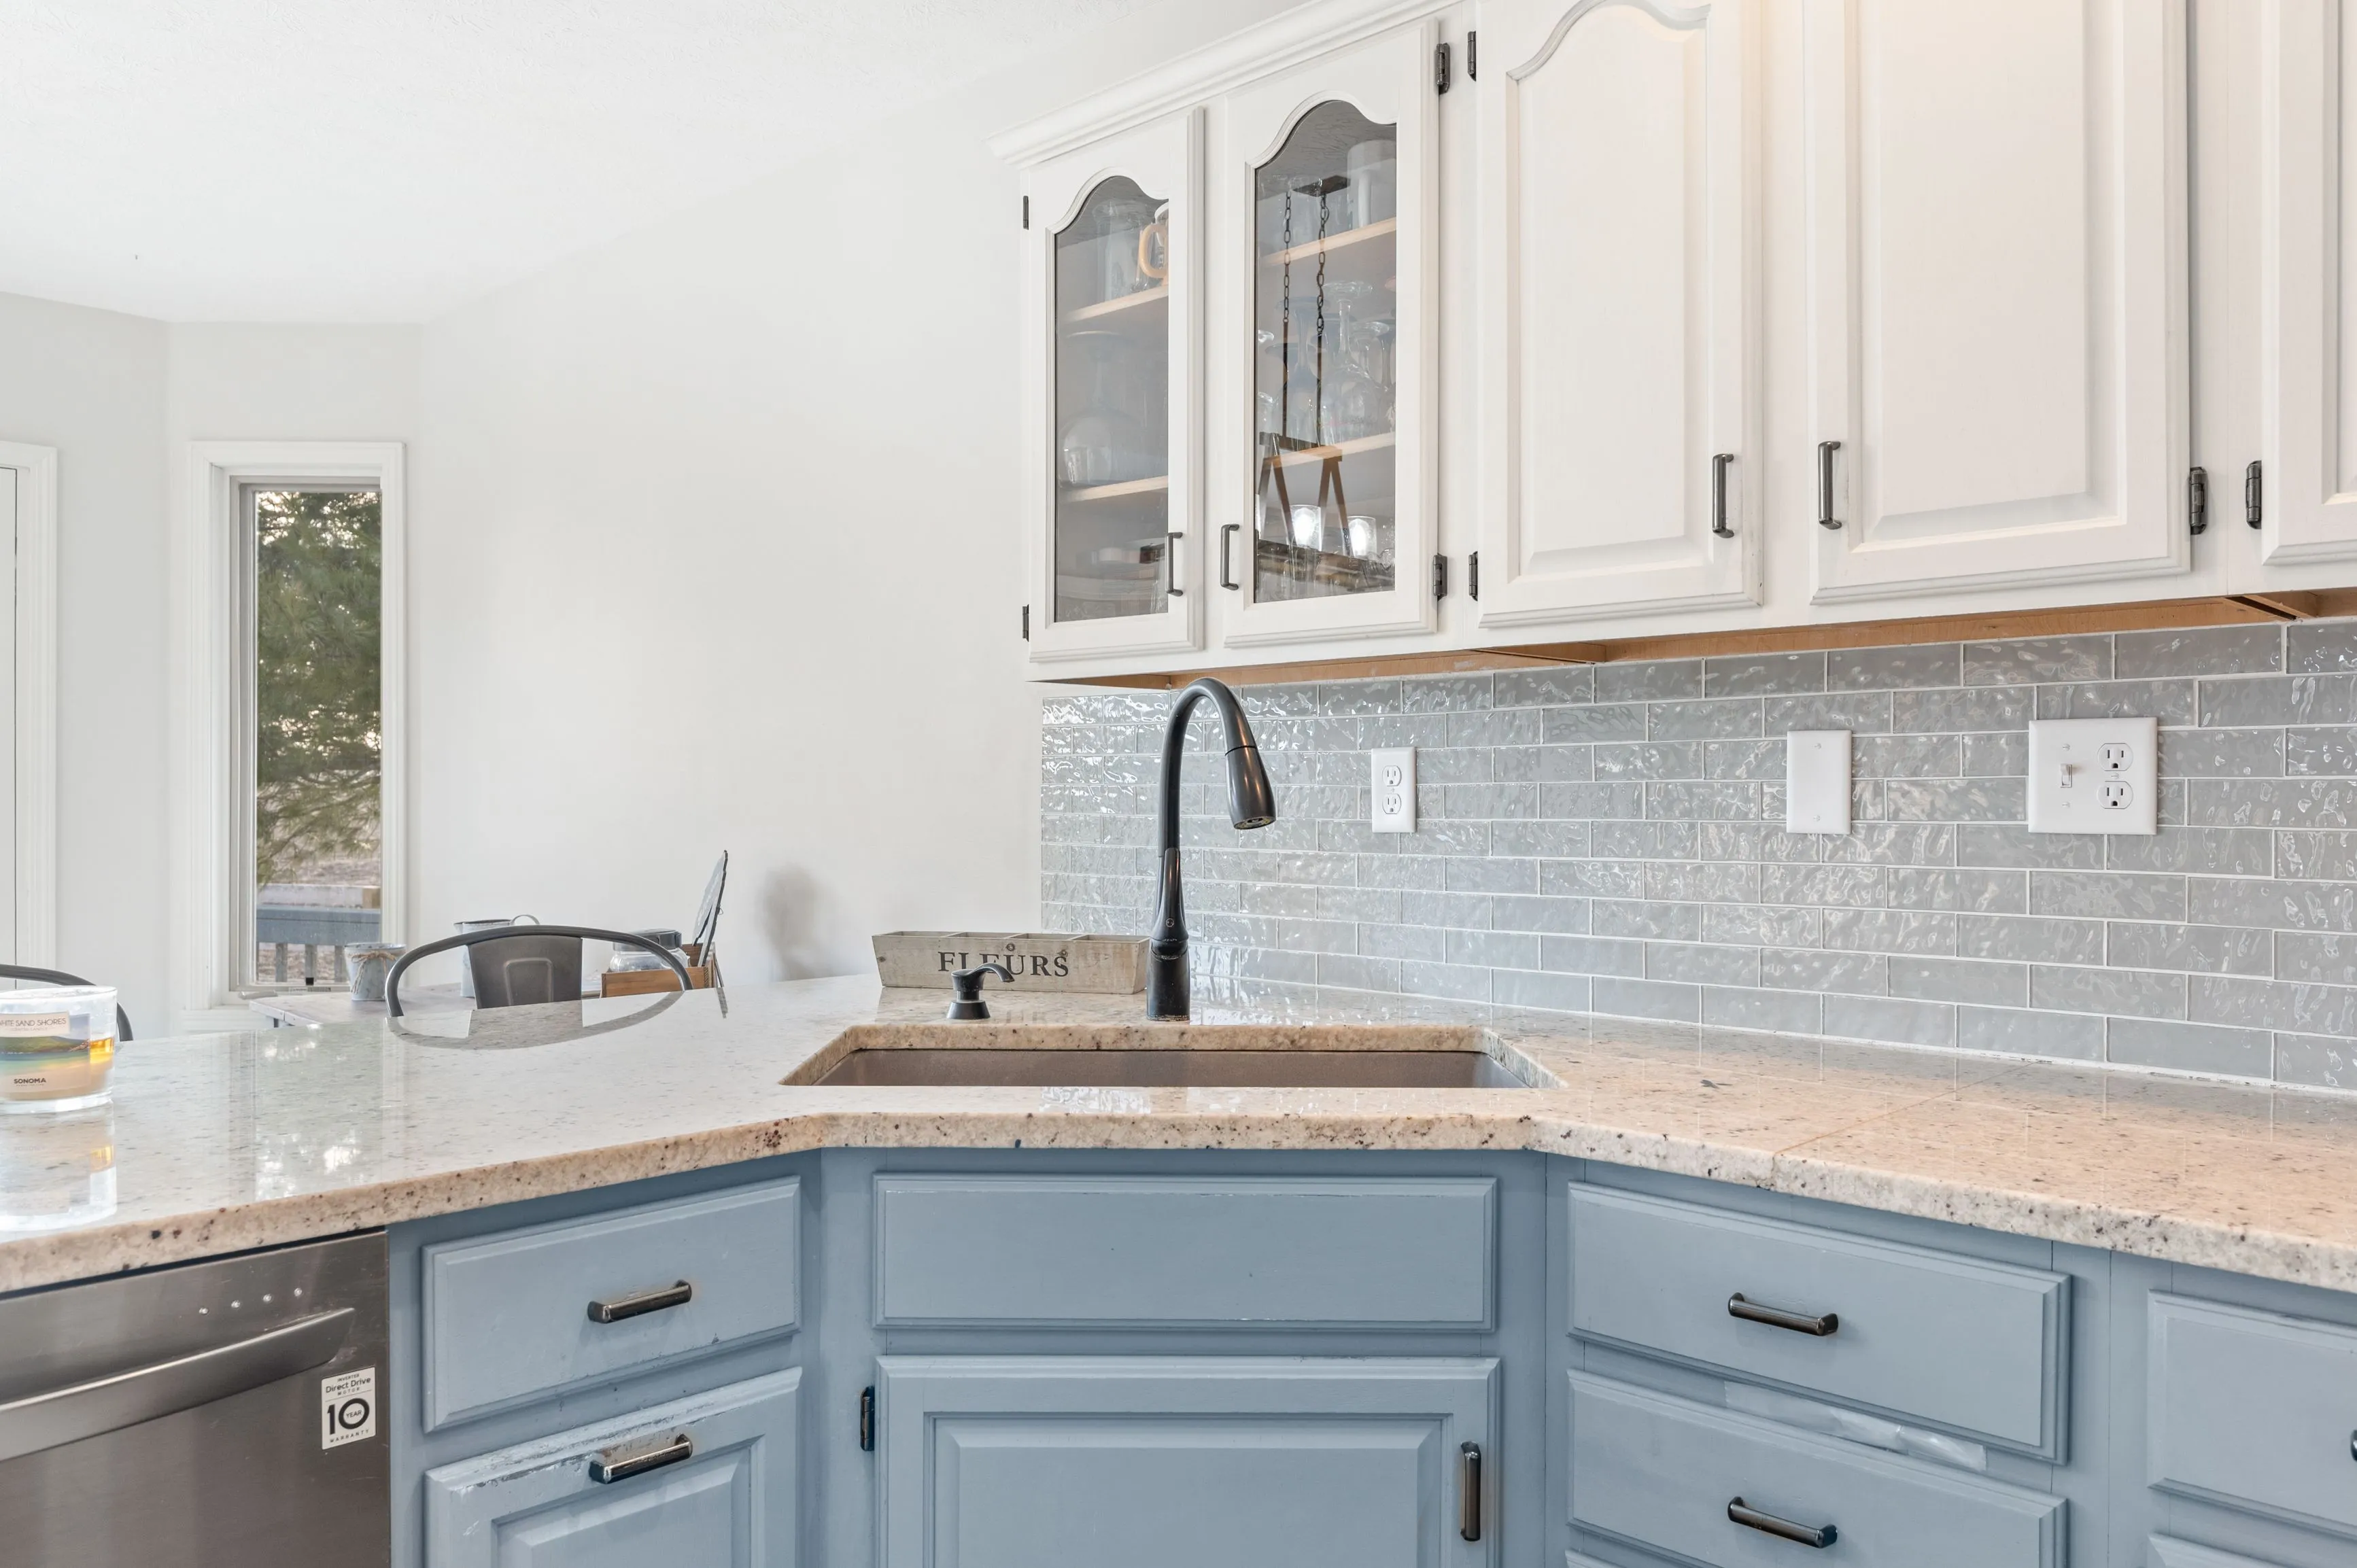 Modern kitchen interior with white upper cabinets and blue lower cabinets, granite countertops, and a subway tile backsplash.